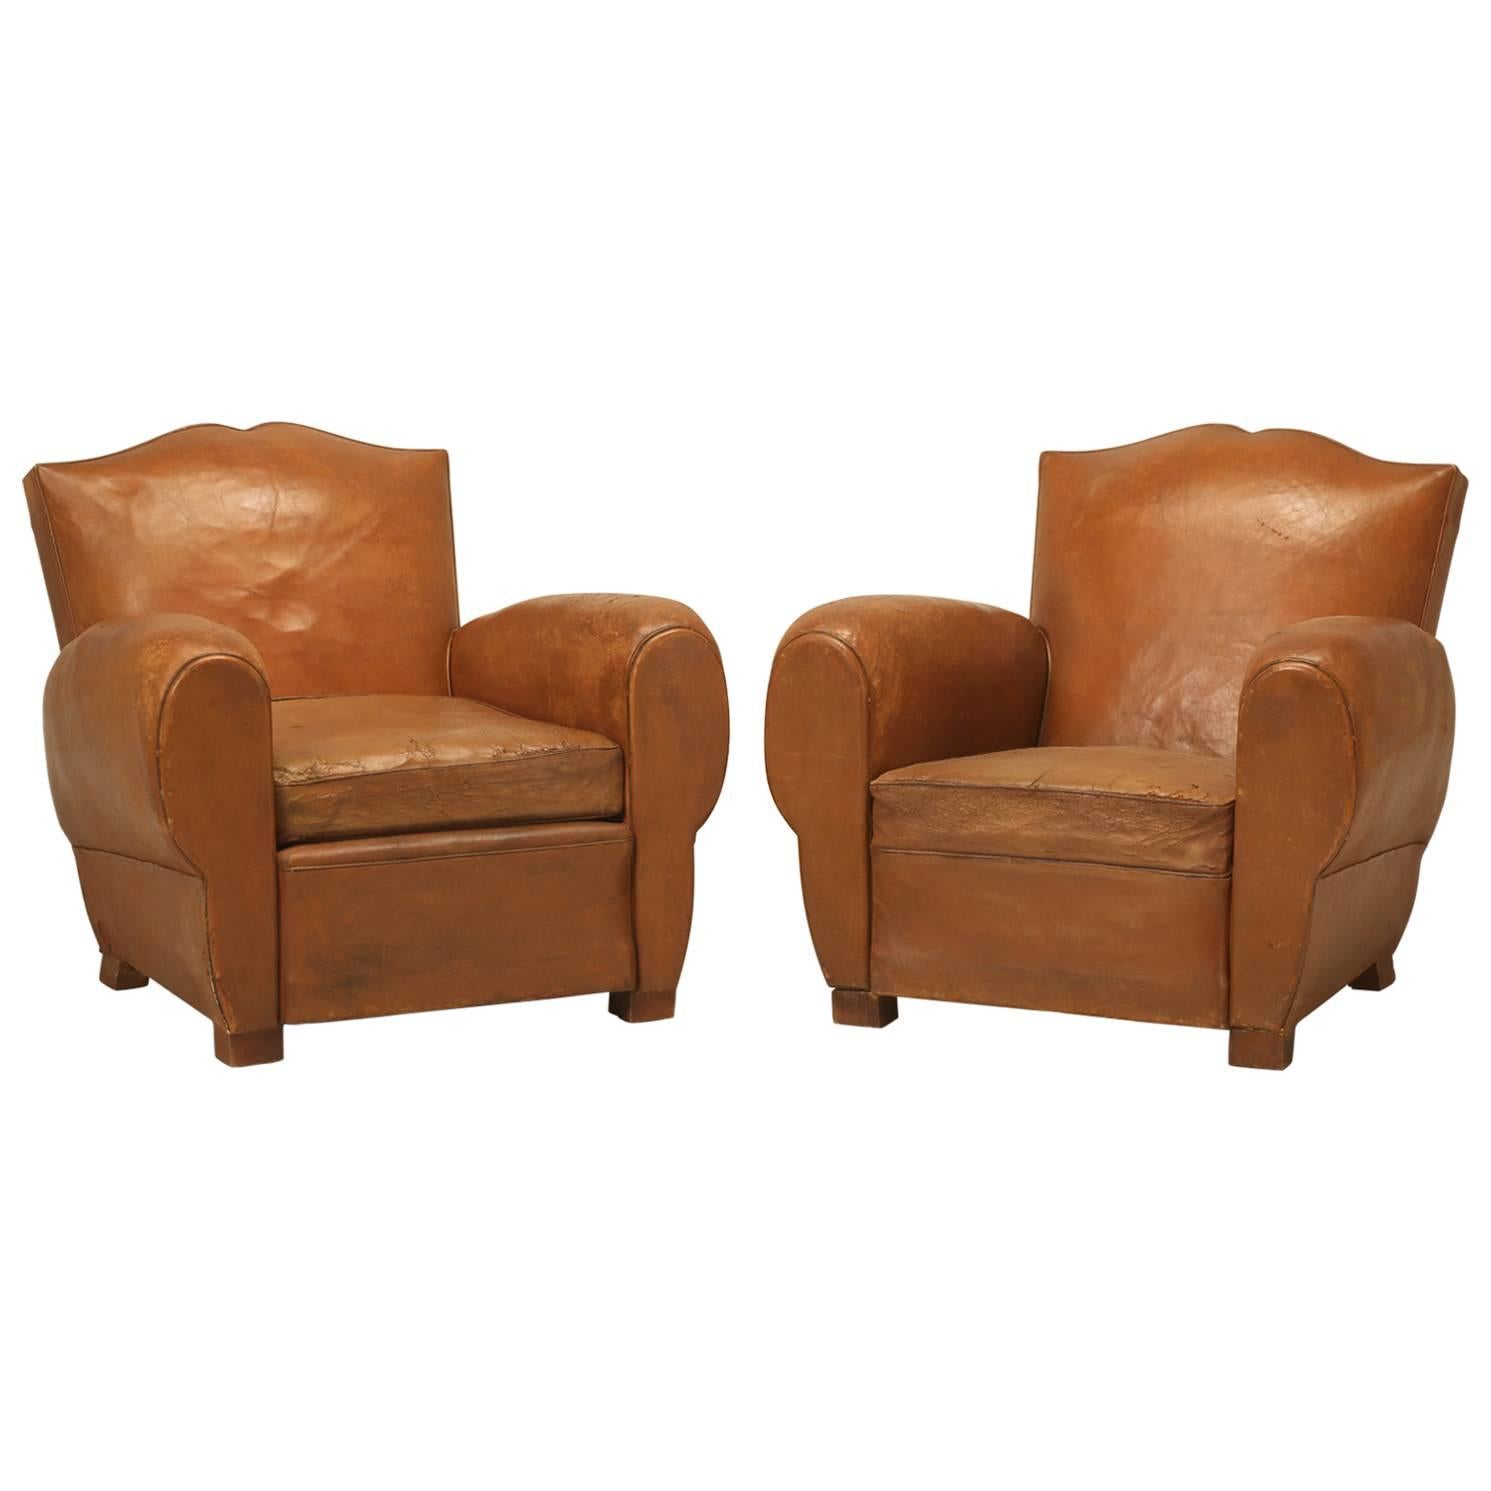 French Leather Club Chairs in a Moustache Style